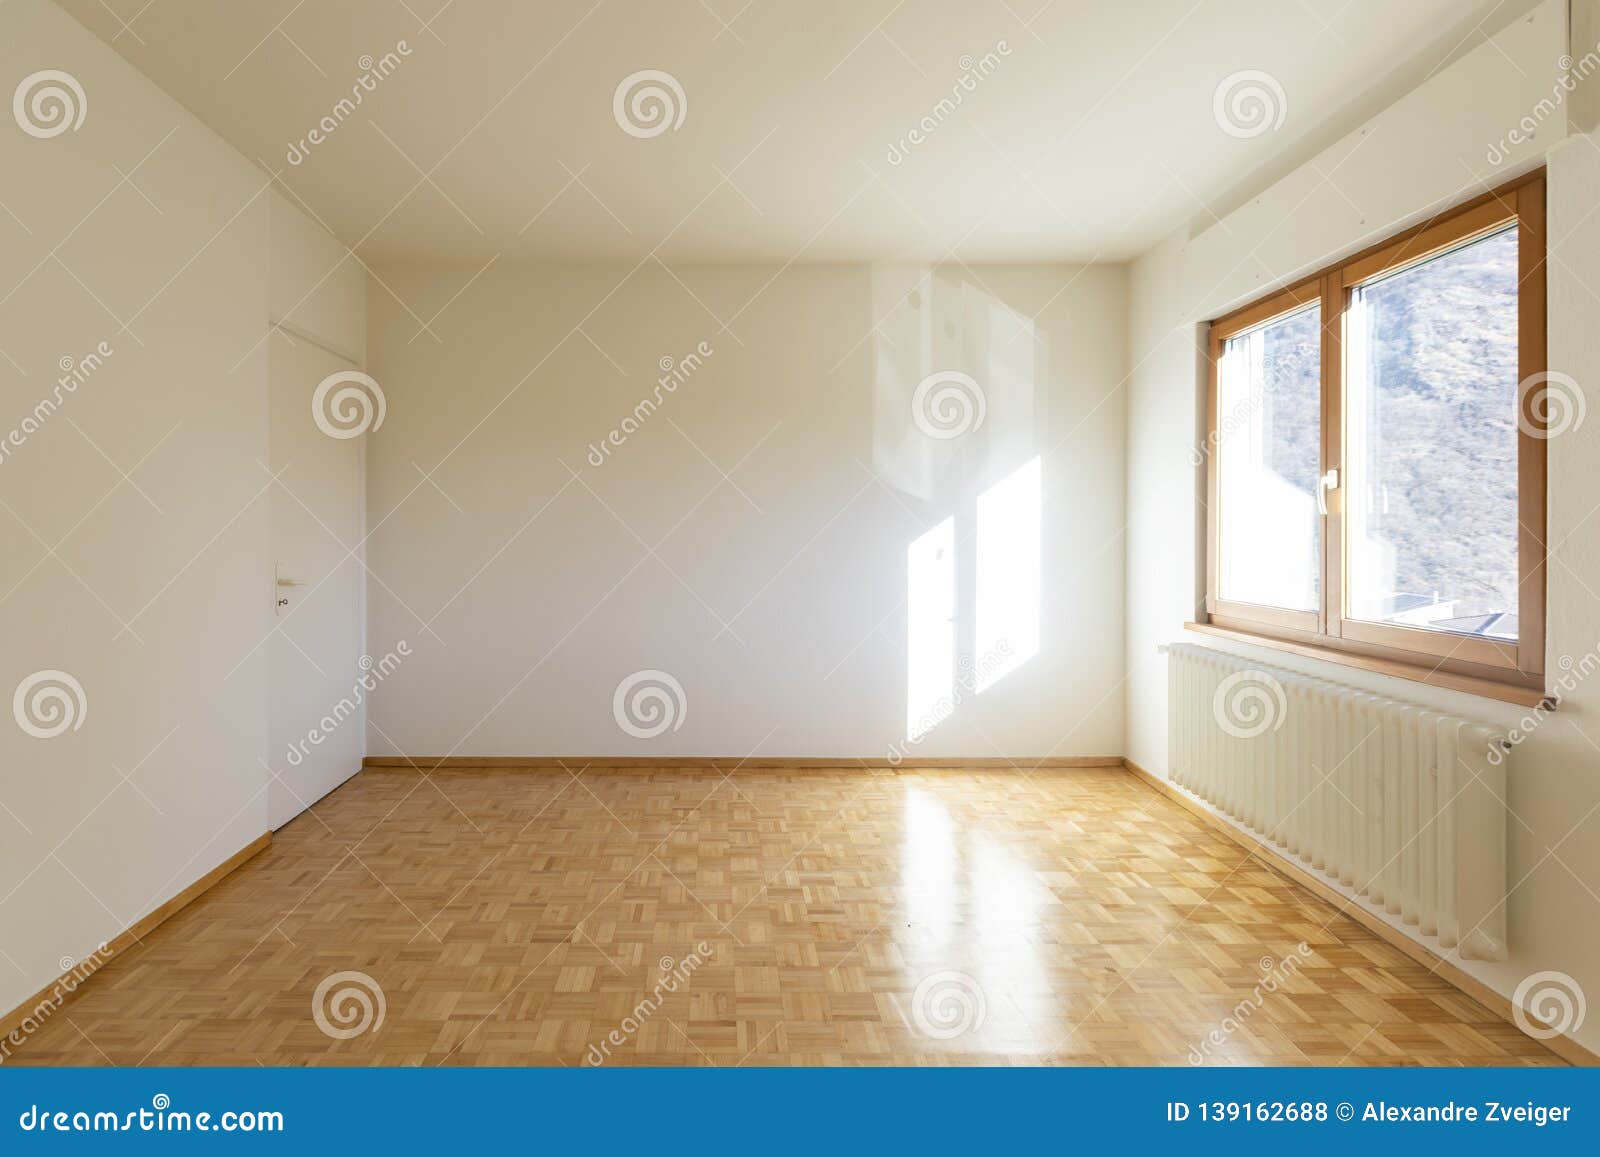 Empty Bedroom Without Bed And Big Window Stock Photo Image